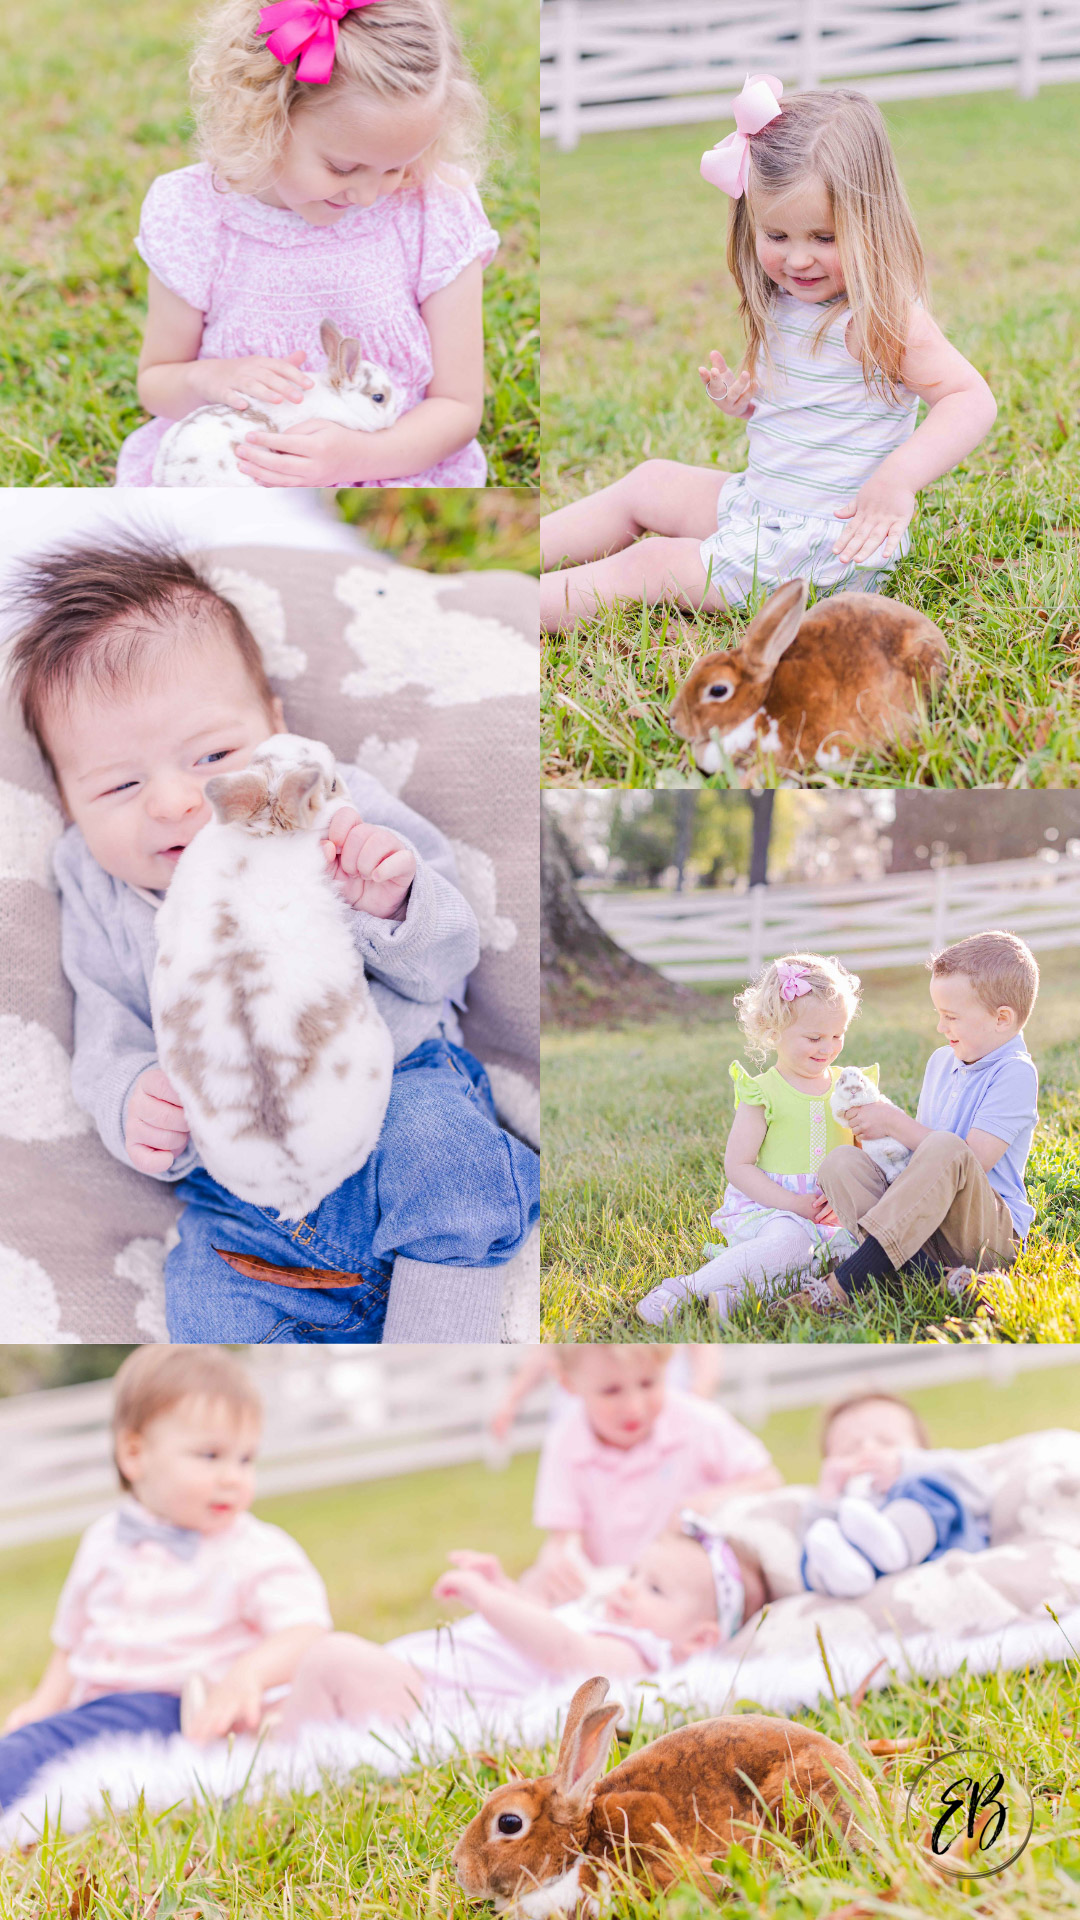 Kids pet live bunnies at live bunny Easter mini sessions in Chickamauga, Georgia near Chattanooga, Tennessee